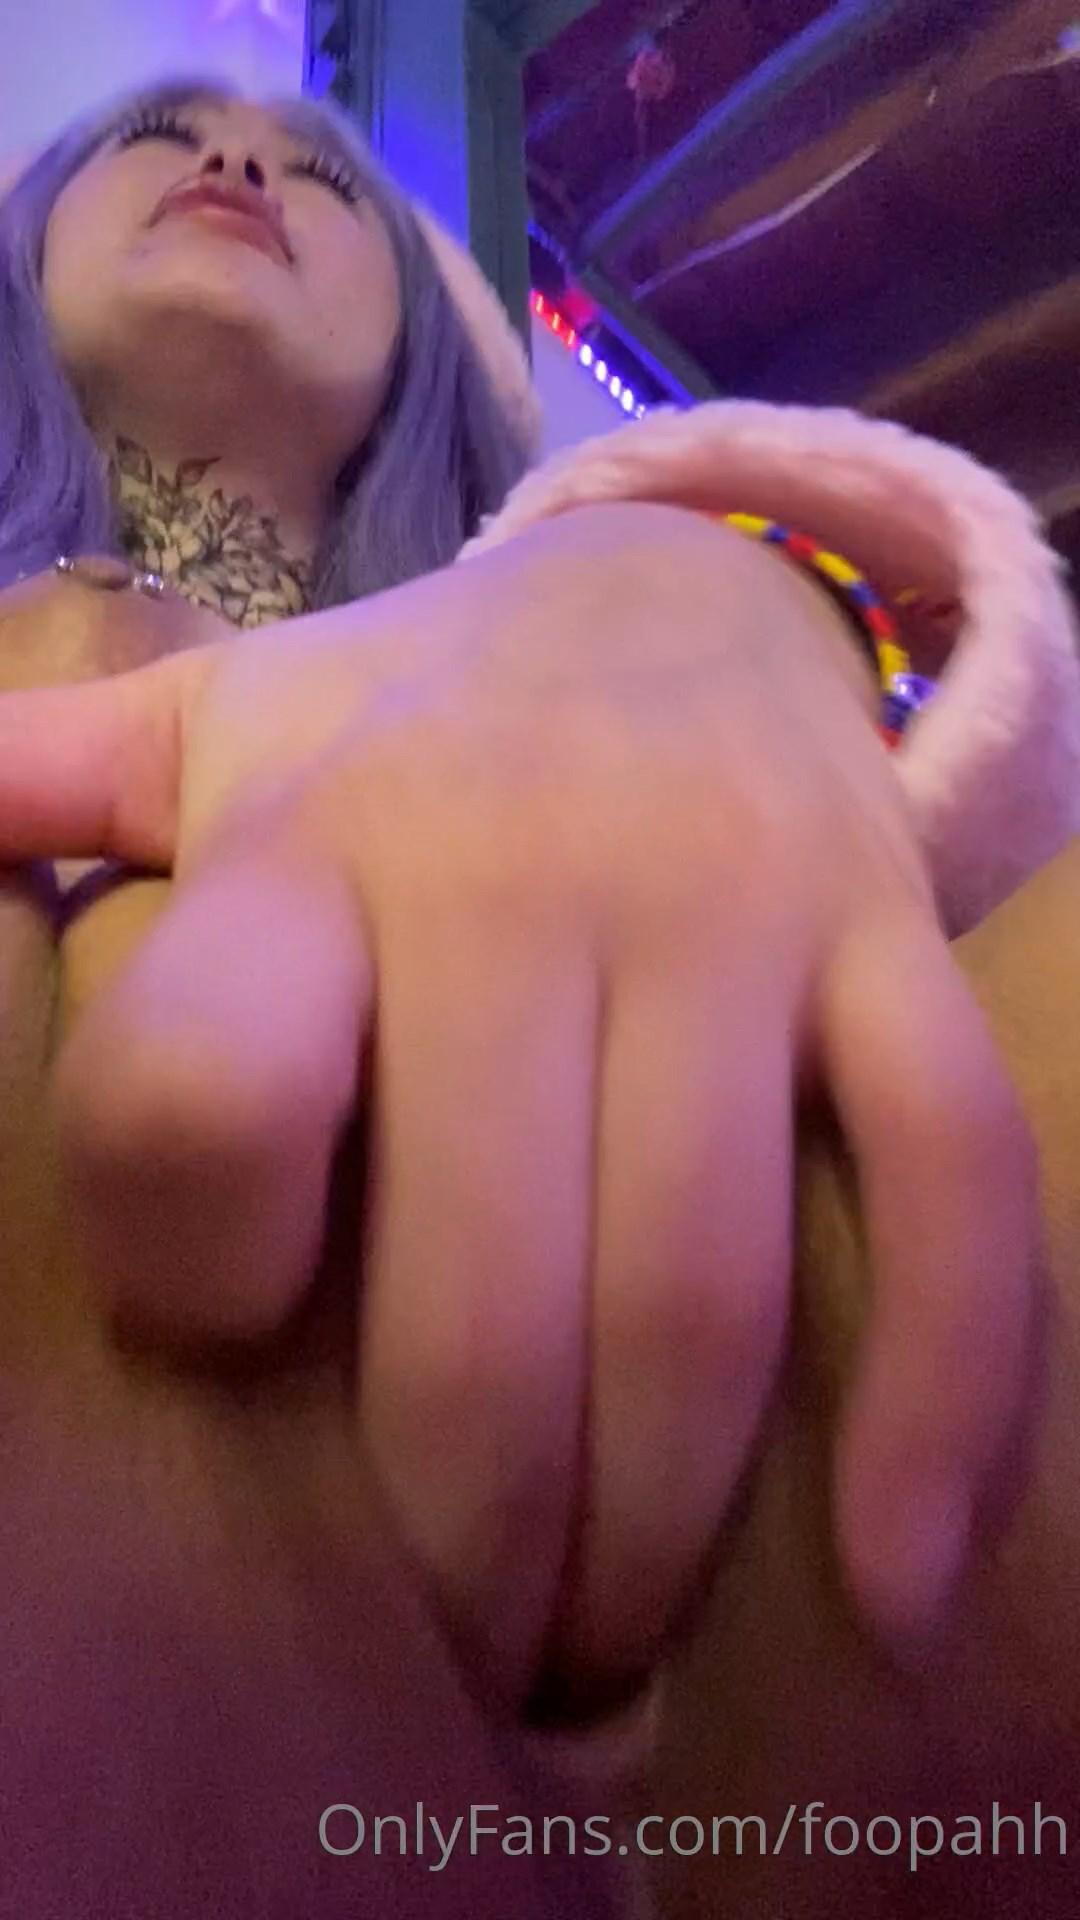 Foopahh Nude Finger Pussy Masturbation Onlyfans Video Leaked - Influencers  Gonewild